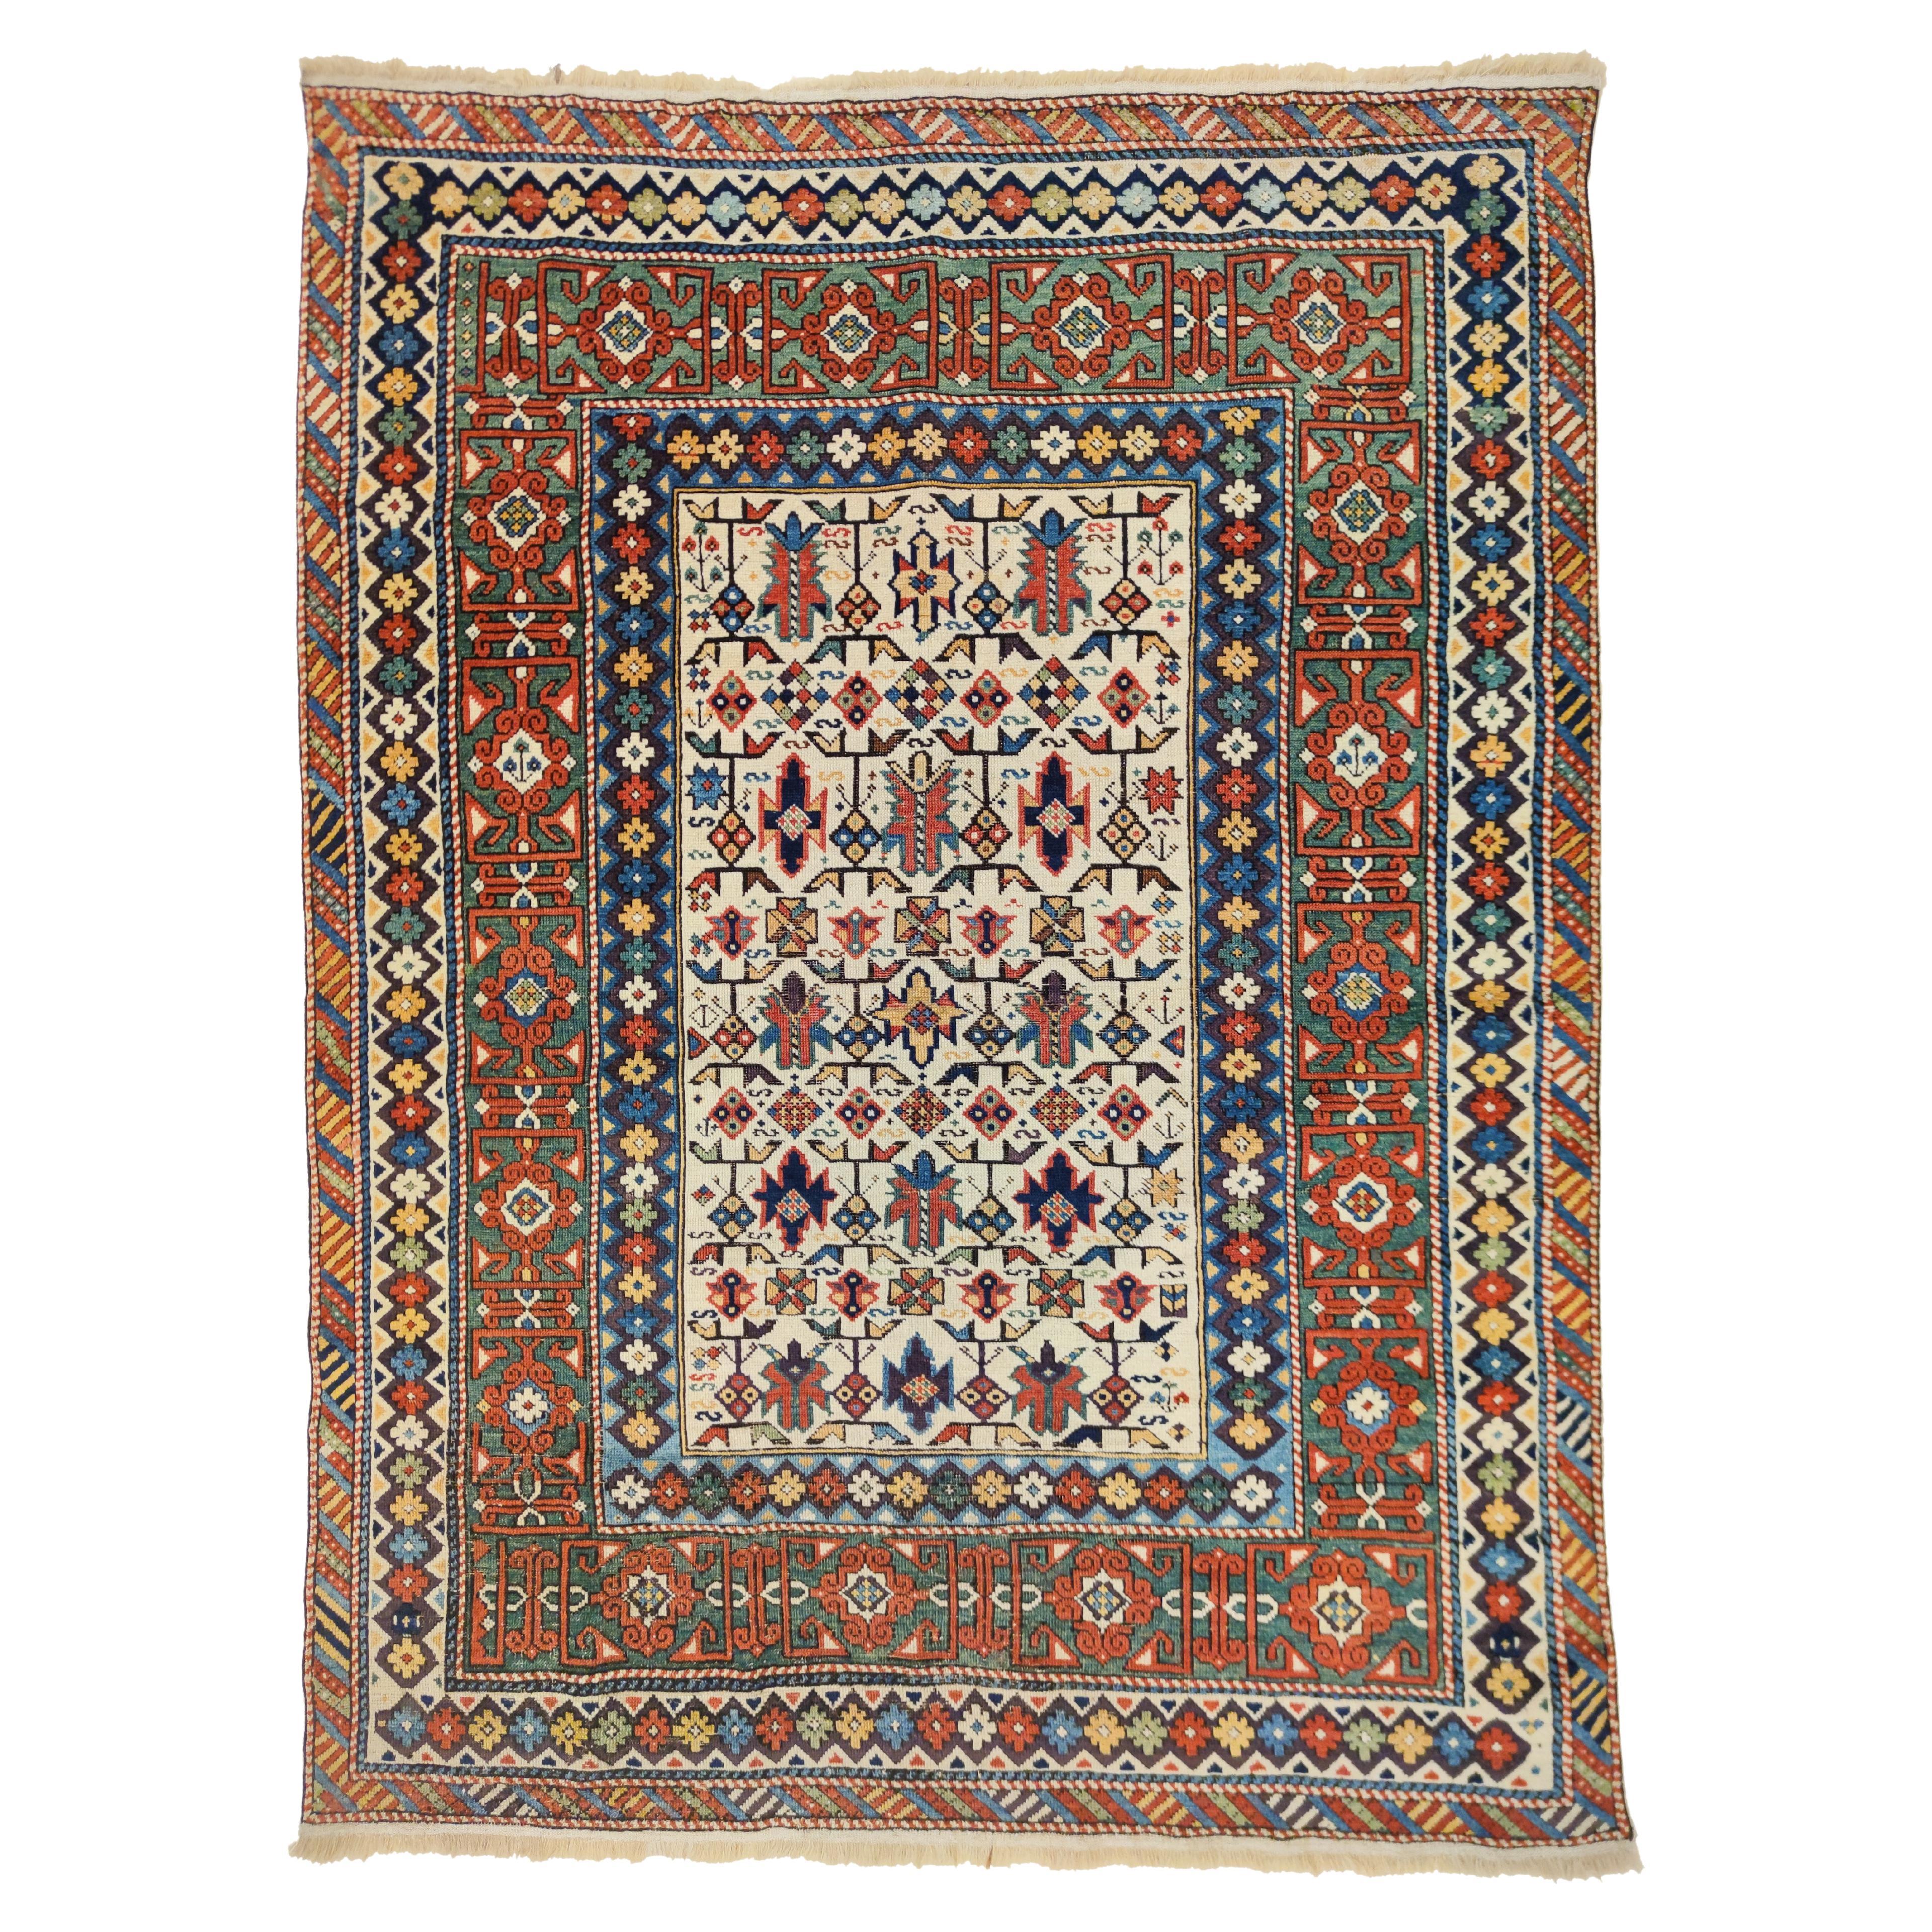 Early and Rare Antique White Ground Kuba Chi-Chi Caucasian Rug   For Sale